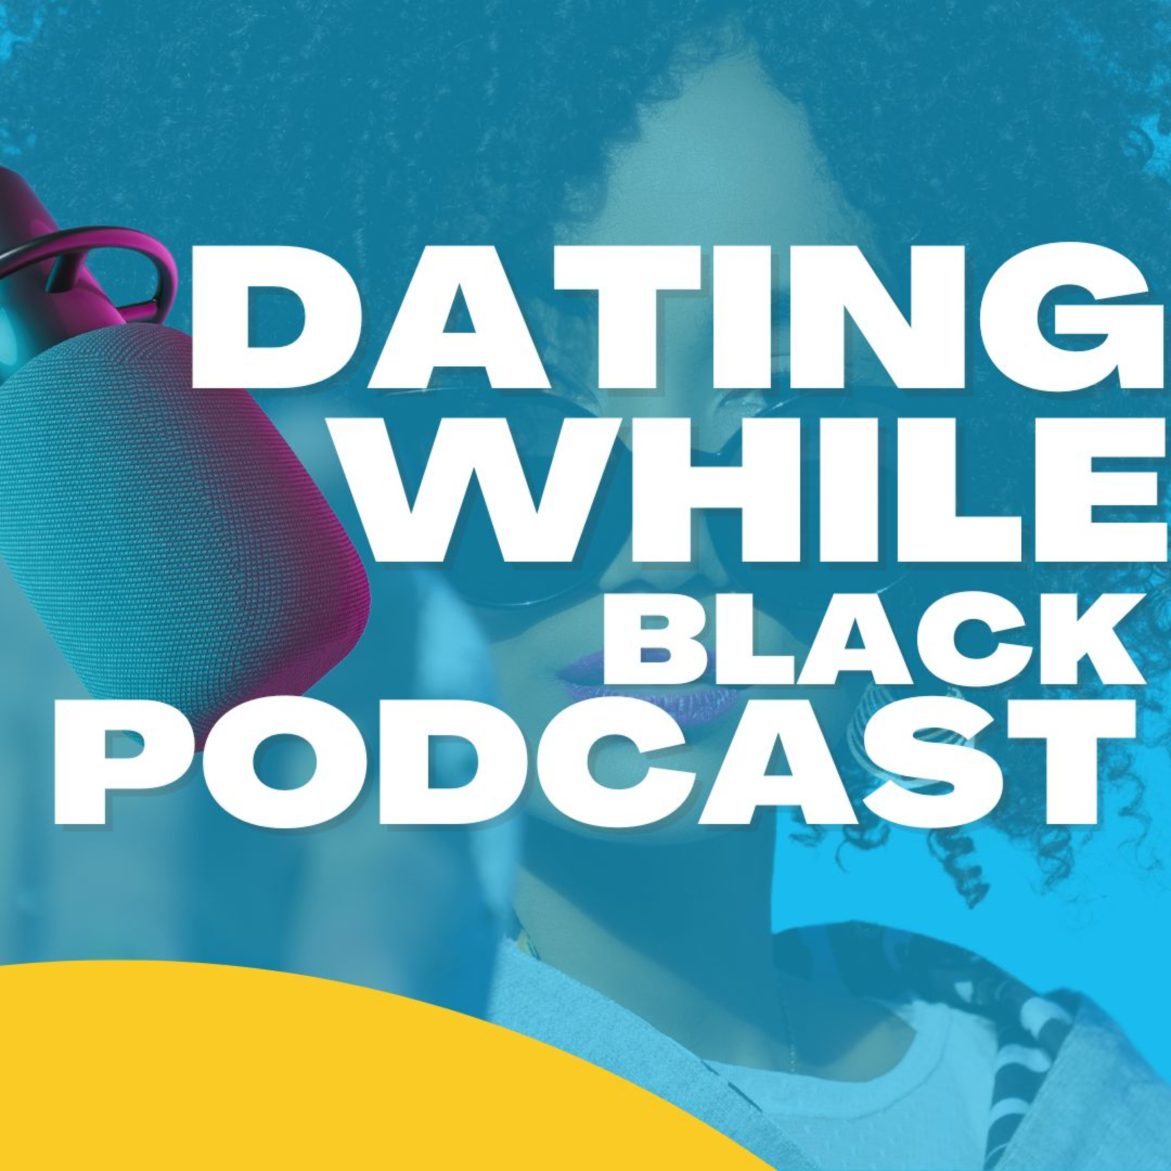 Black Podcasting - White Clawing